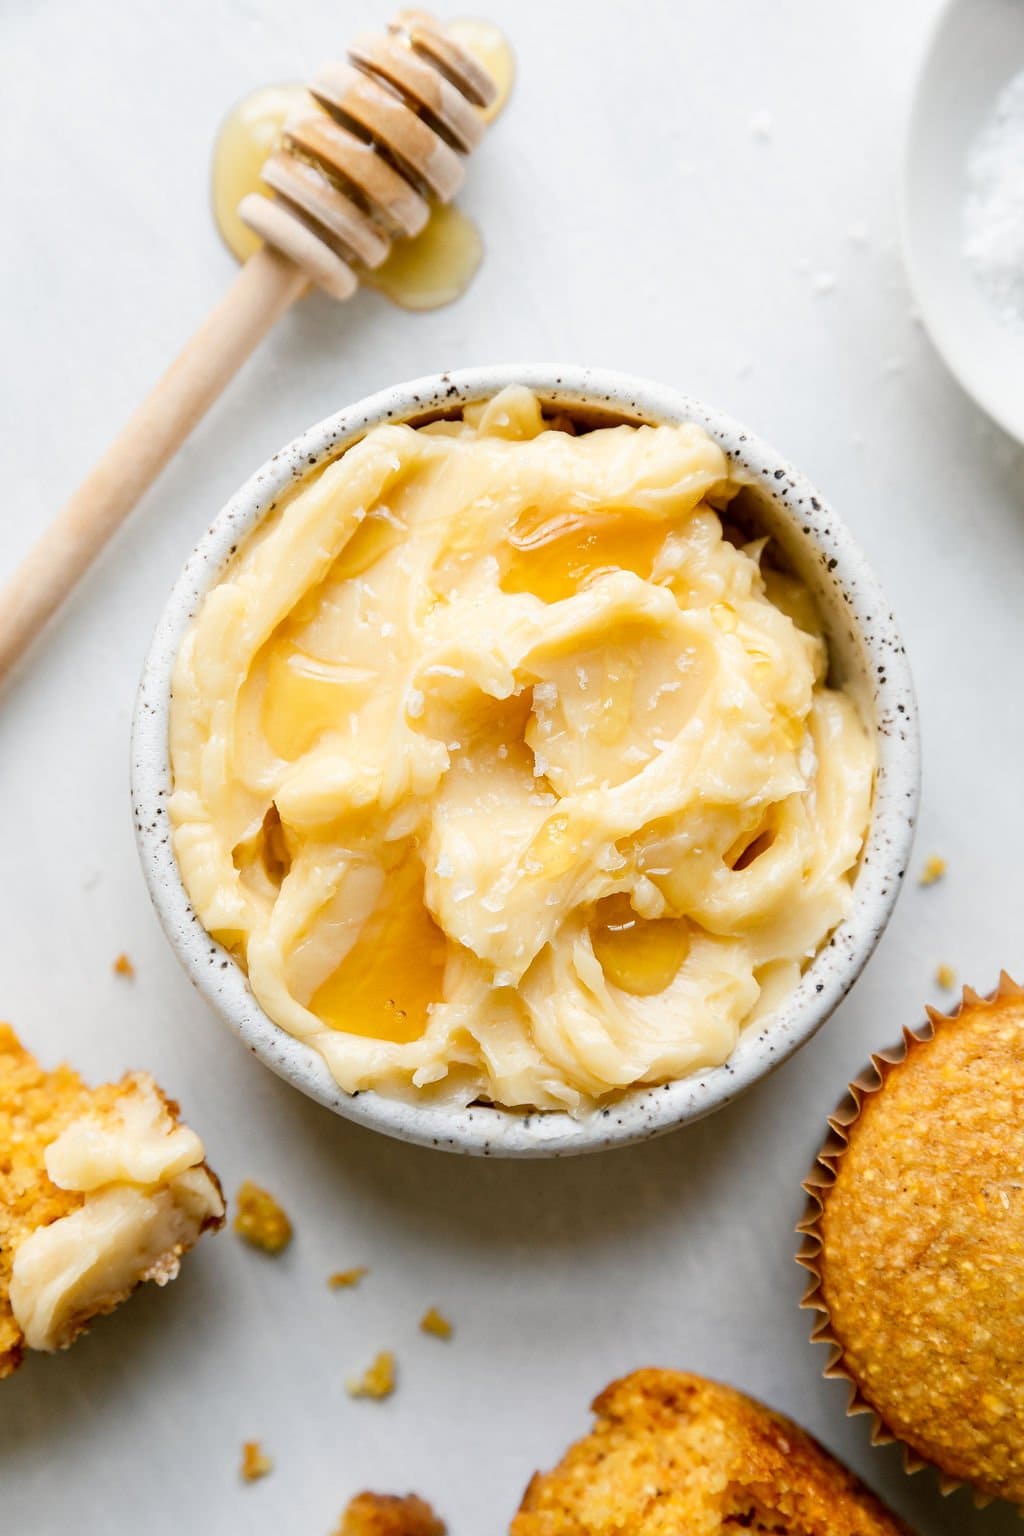 https://therealfooddietitians.com/wp-content/uploads/2022/06/Easy-Honey-Butter-Recipe-3.jpg